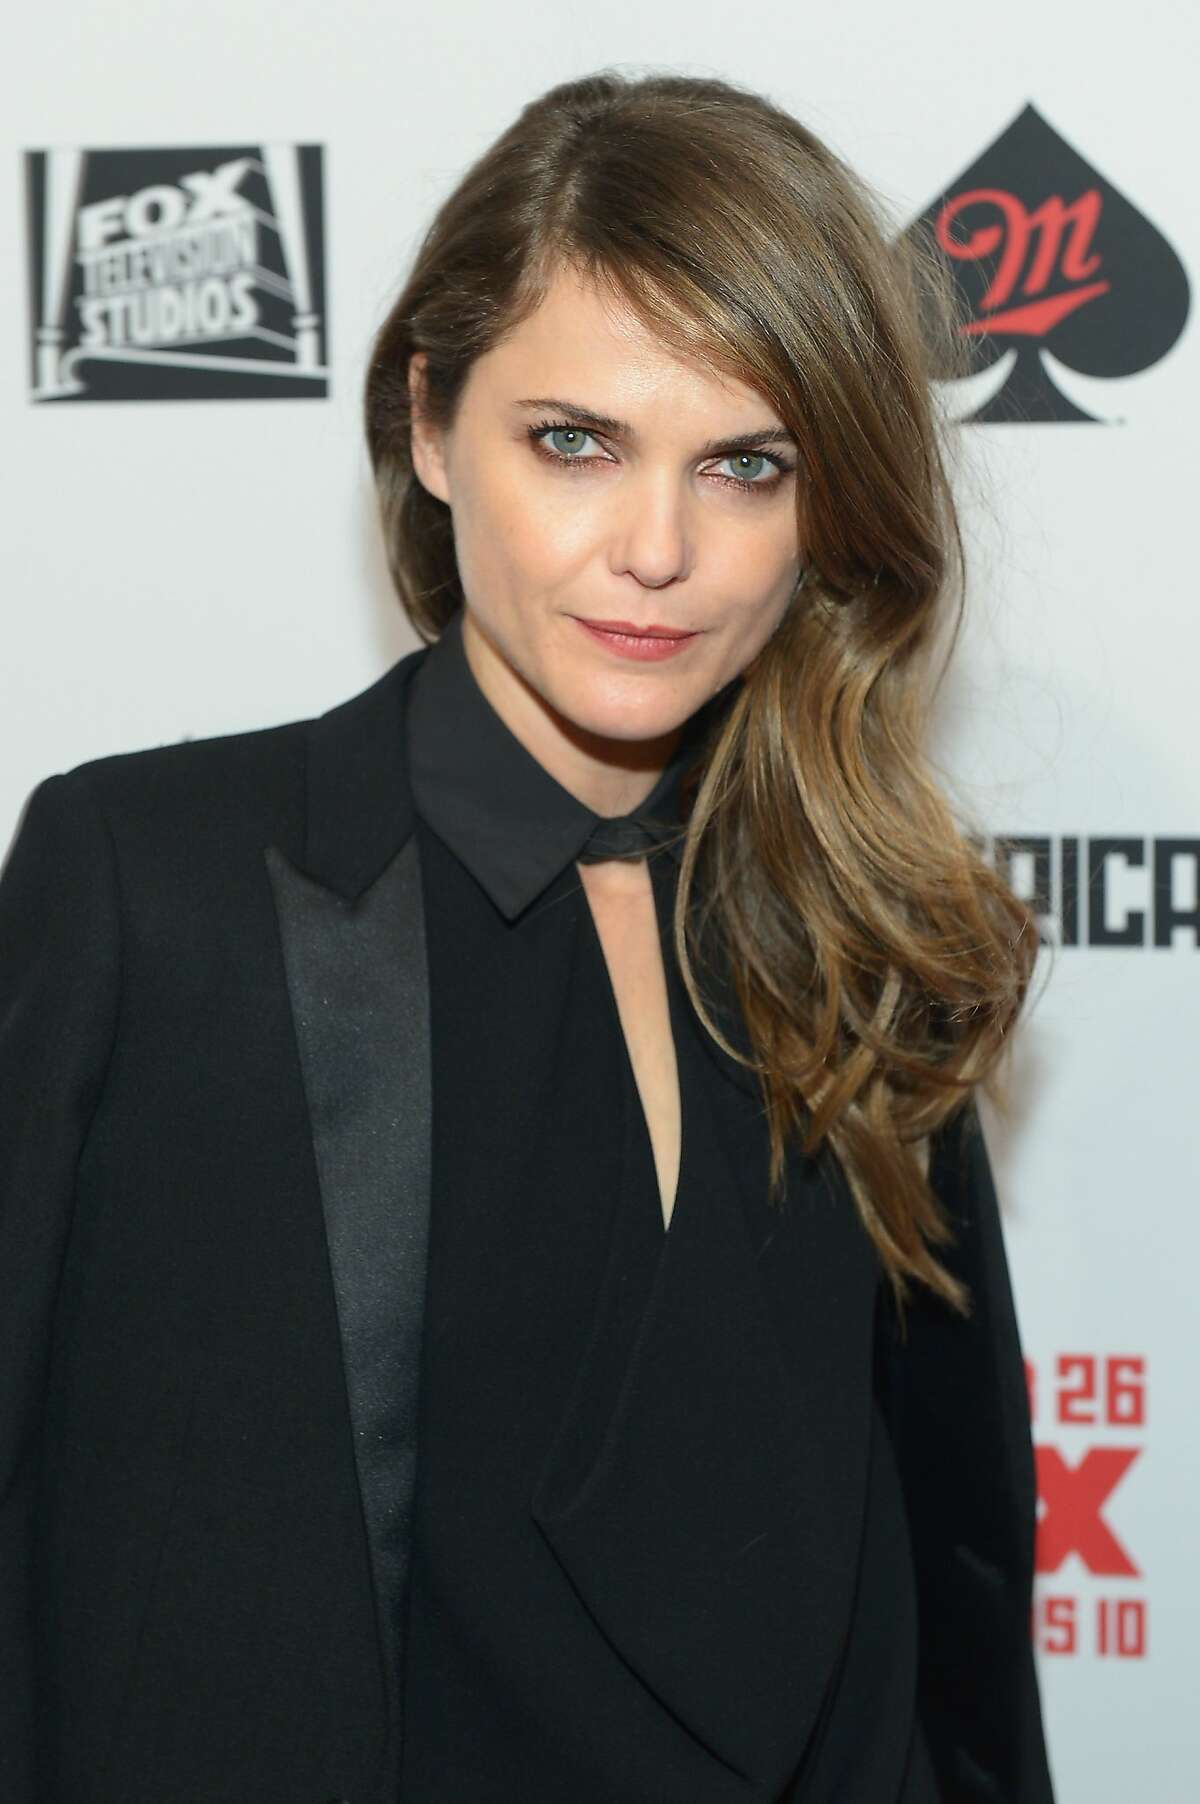 Keri Russell, 38More: 2014's World's Most Beautiful List